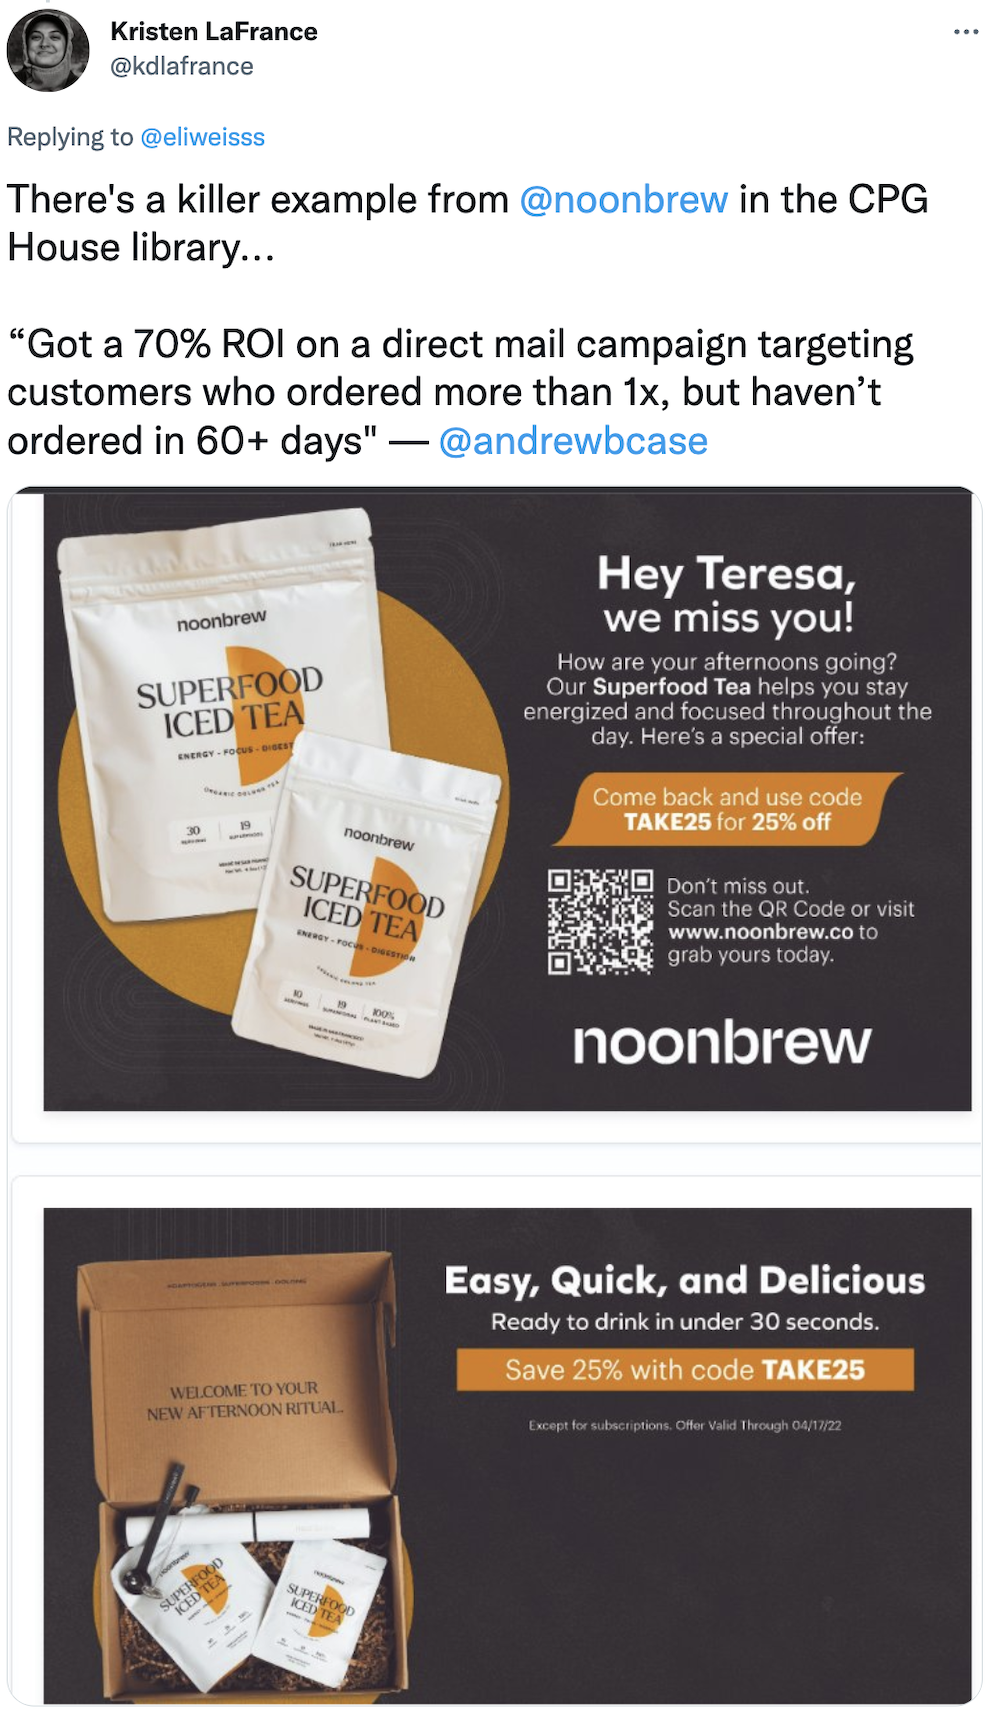 Tweet: There's a killer example from 
@noonbrew
 in the CPG House library...

“Got a 70% ROI on a direct mail campaign targeting customers who ordered more than 1x, but haven’t ordered in 60+ days" — 
@andrewbcase